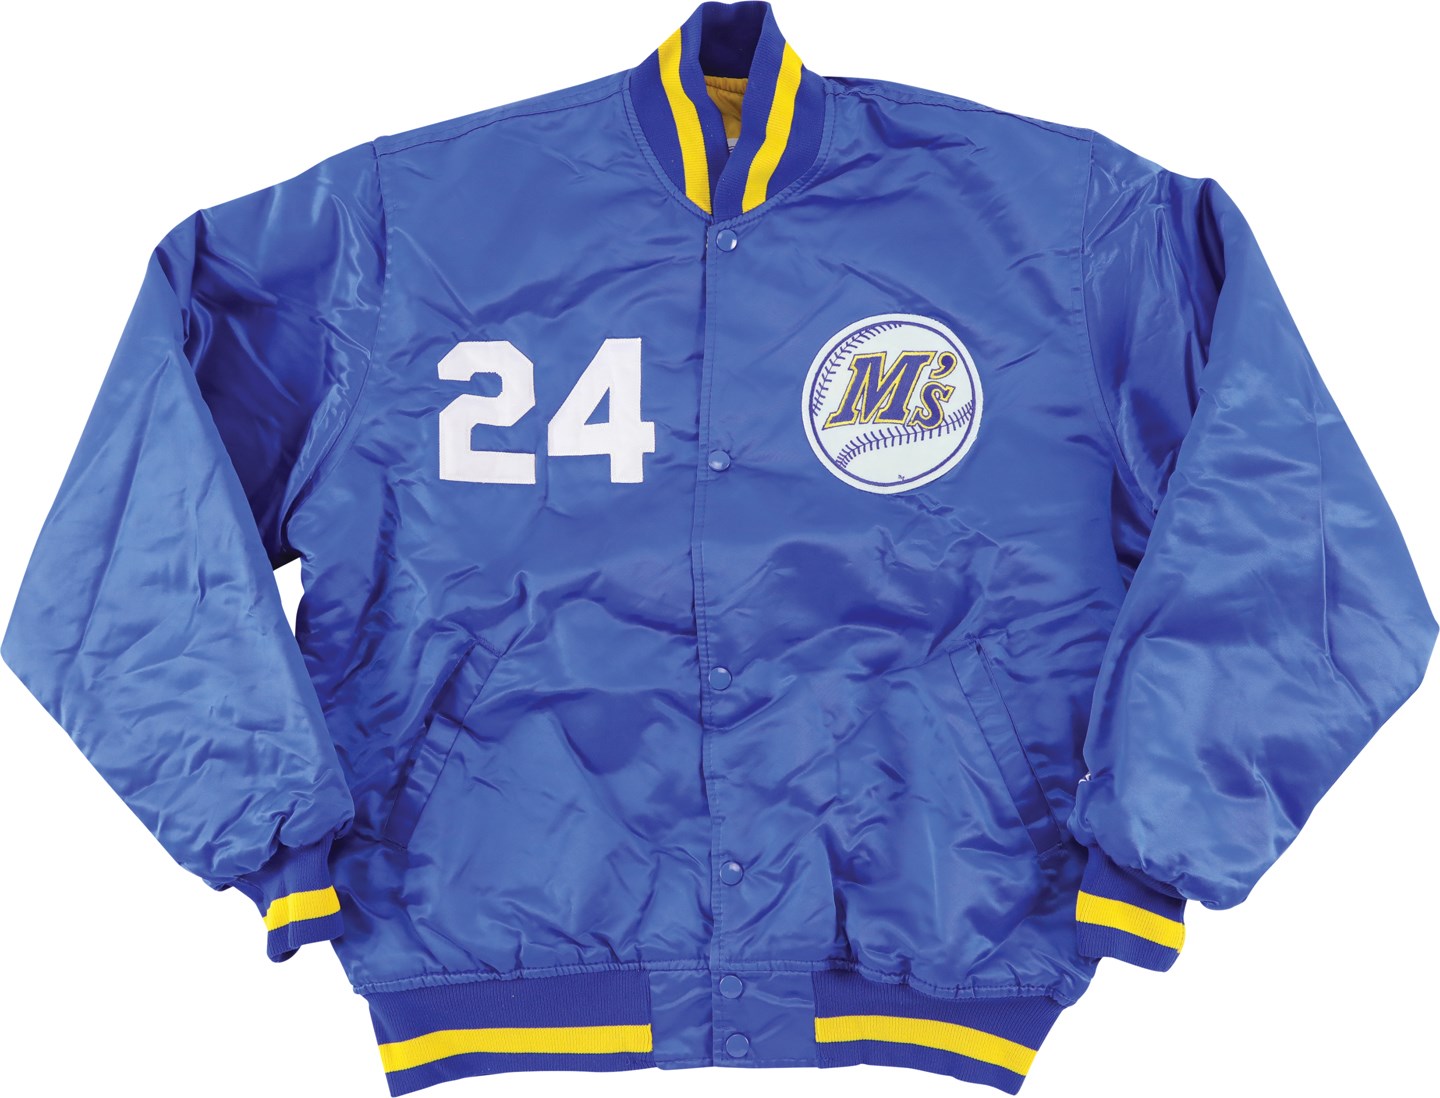 Baseball Equipment - 1992 Ken Griffey Jr. Seattle Mariners Game Worn Jacket (Team Sourced & Style Matched)